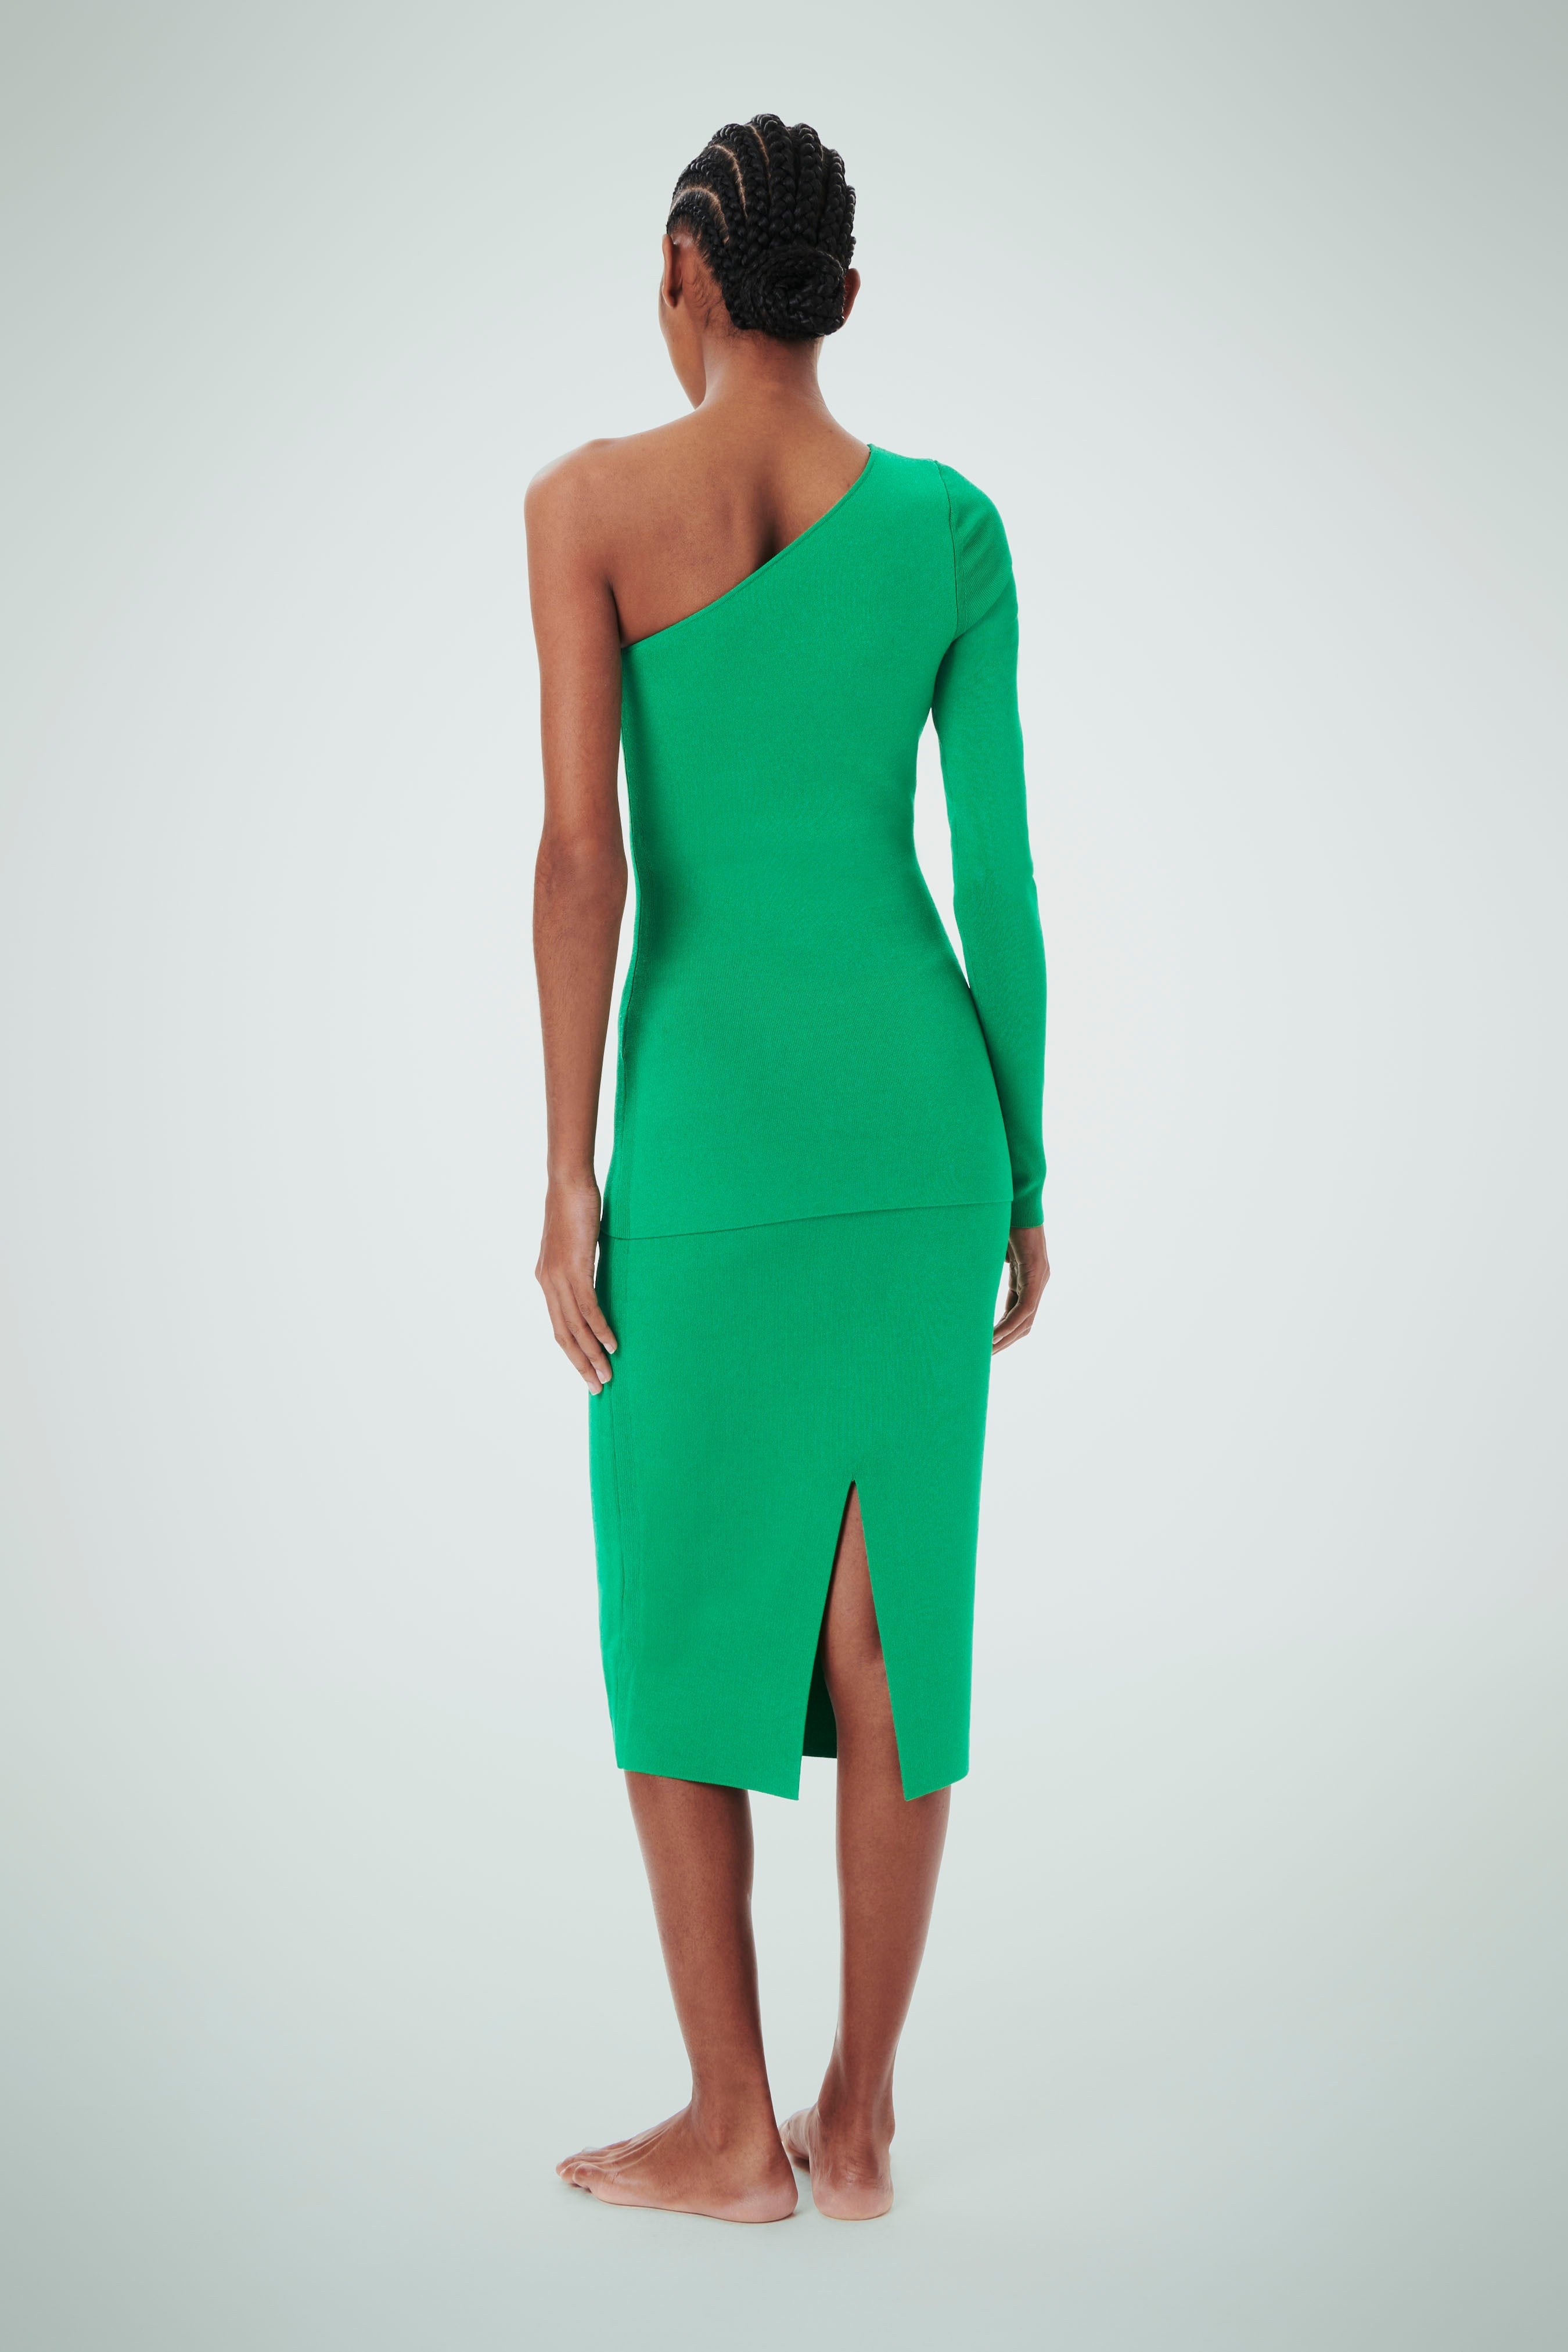 VB Body Fitted Midi Skirt in Green - 5